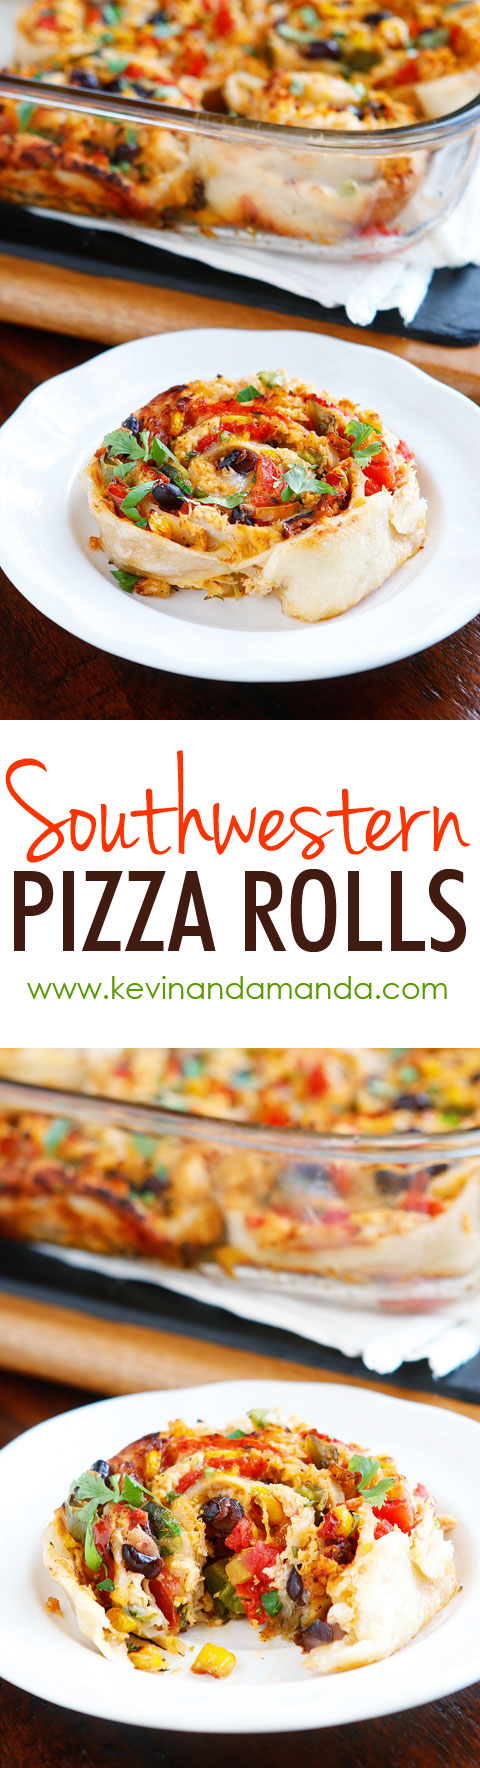 We cannot stop eating these Southwestern Chicken Pizza Rolls!! They are so good! They make me want to go back for seconds and thirds!